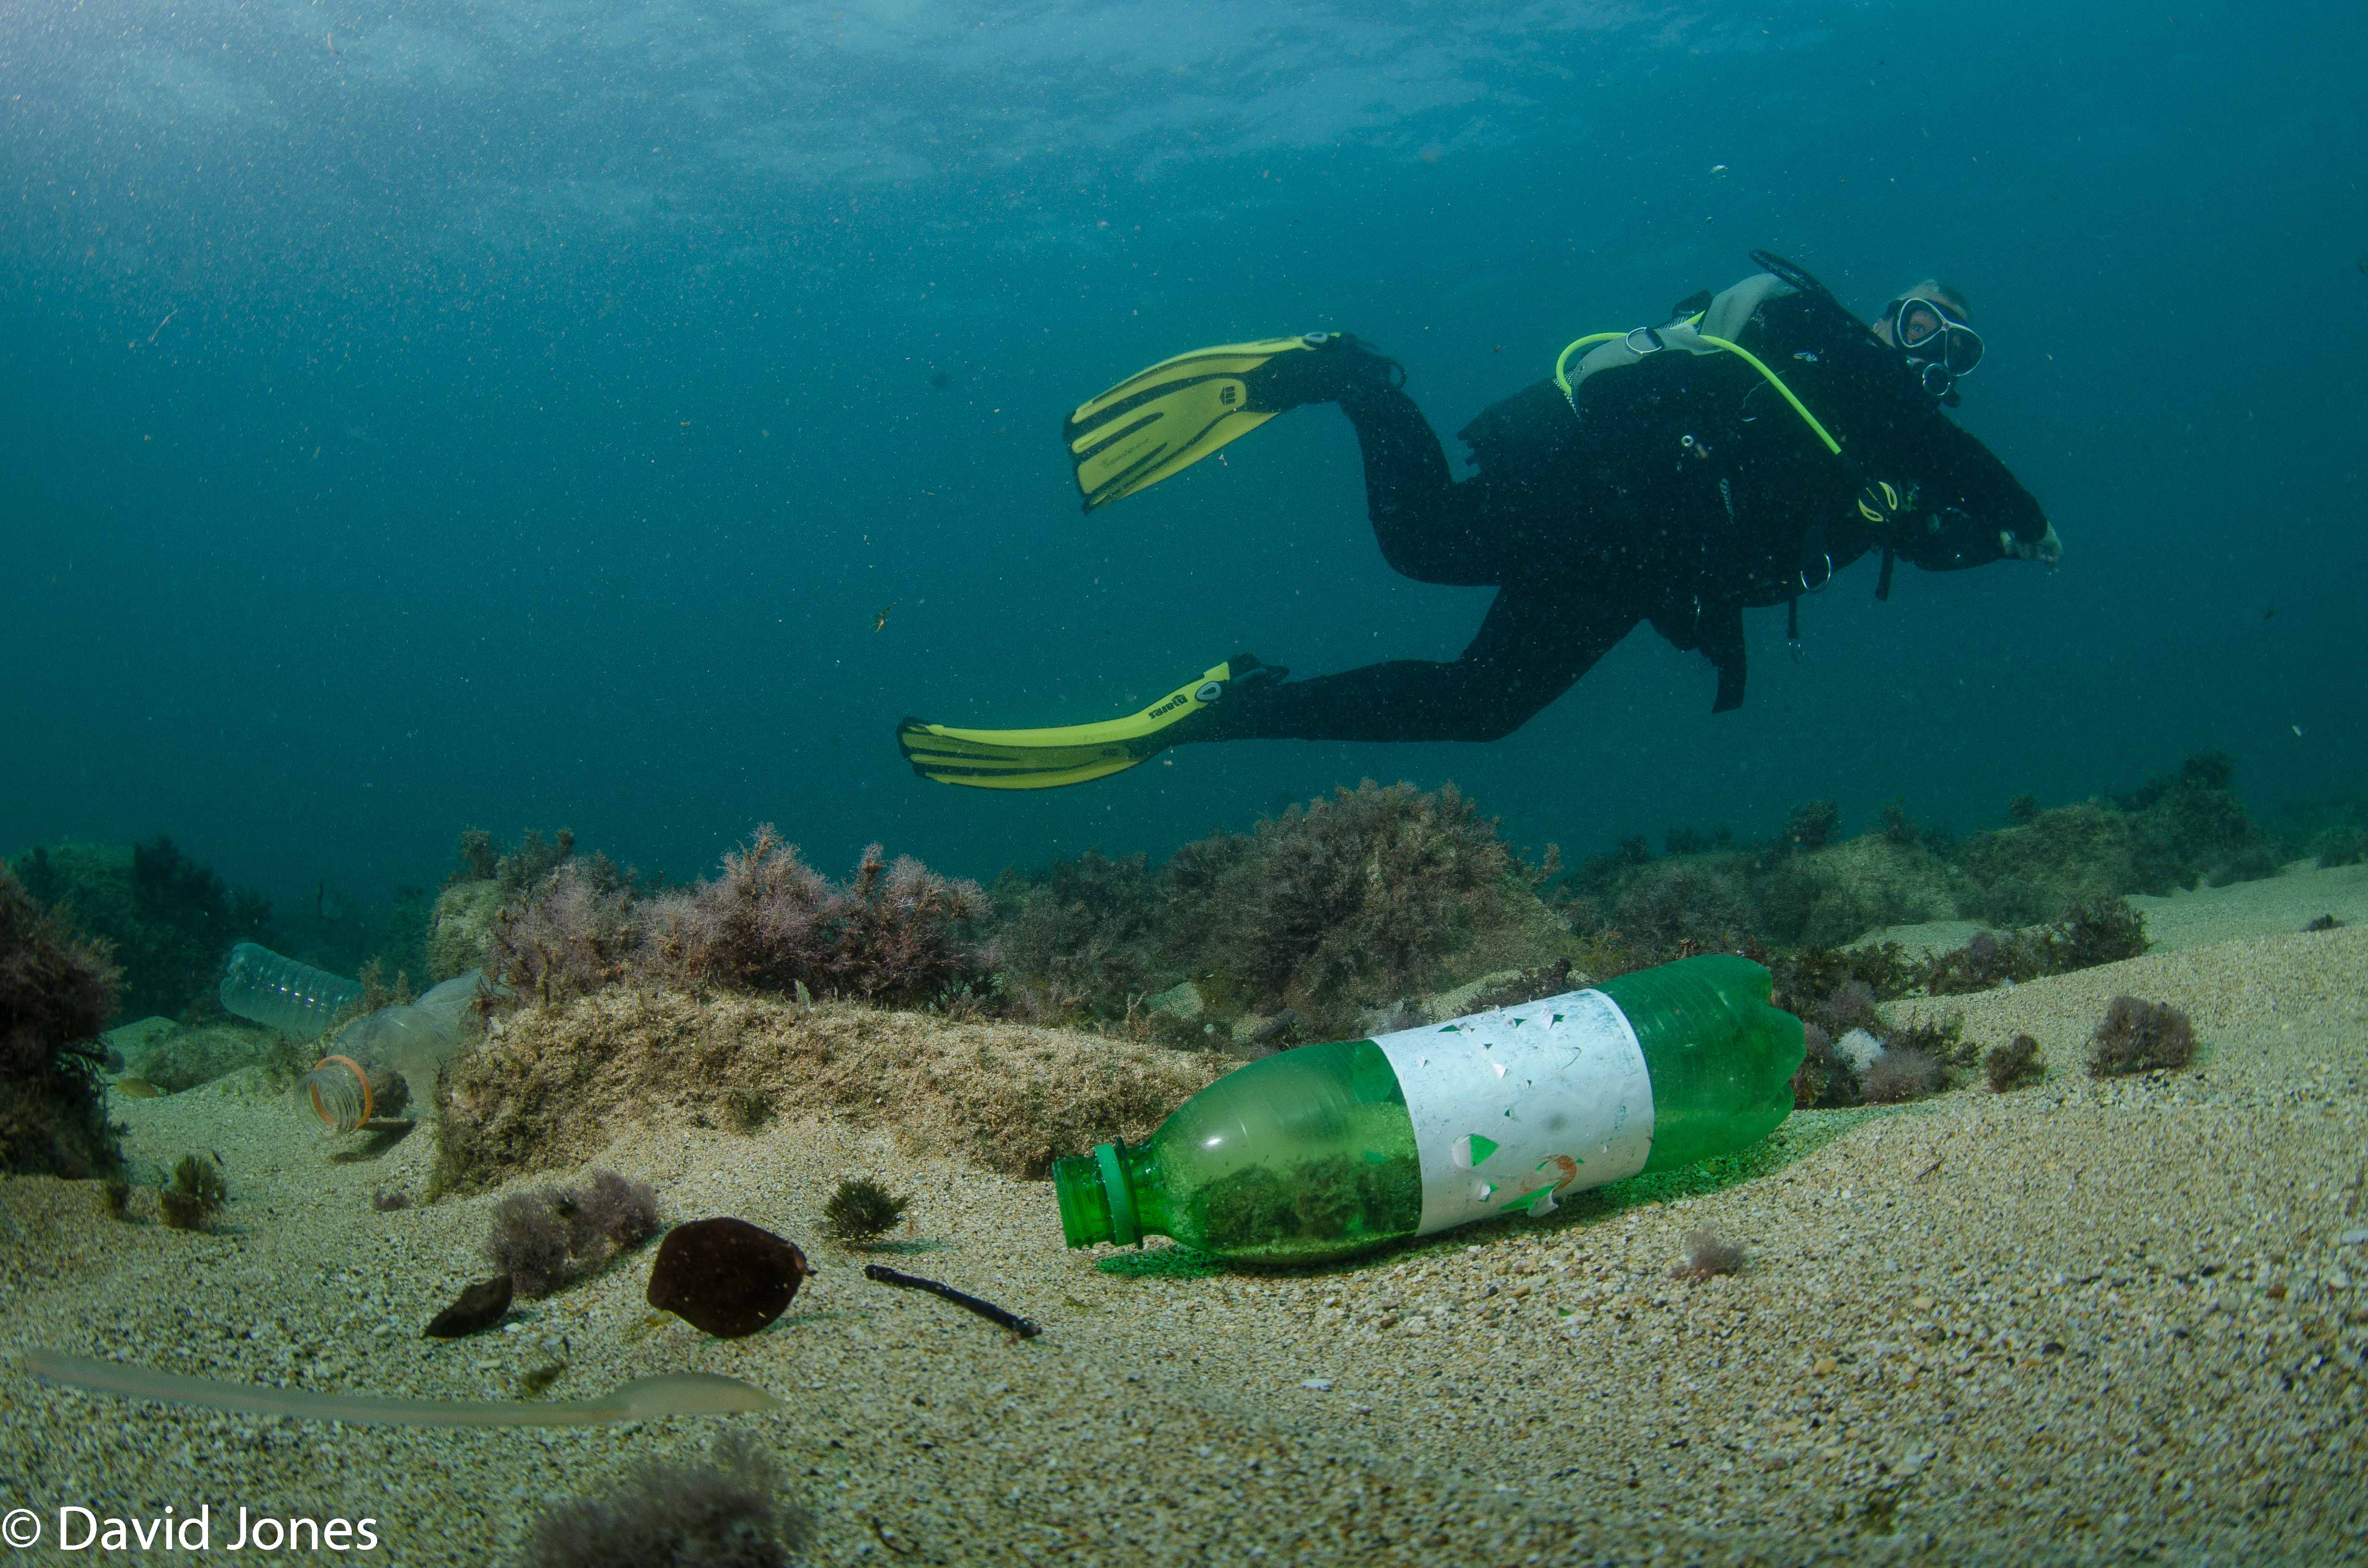 Testing the degradation of bio-plastics in the marine environment – are we missing the point?